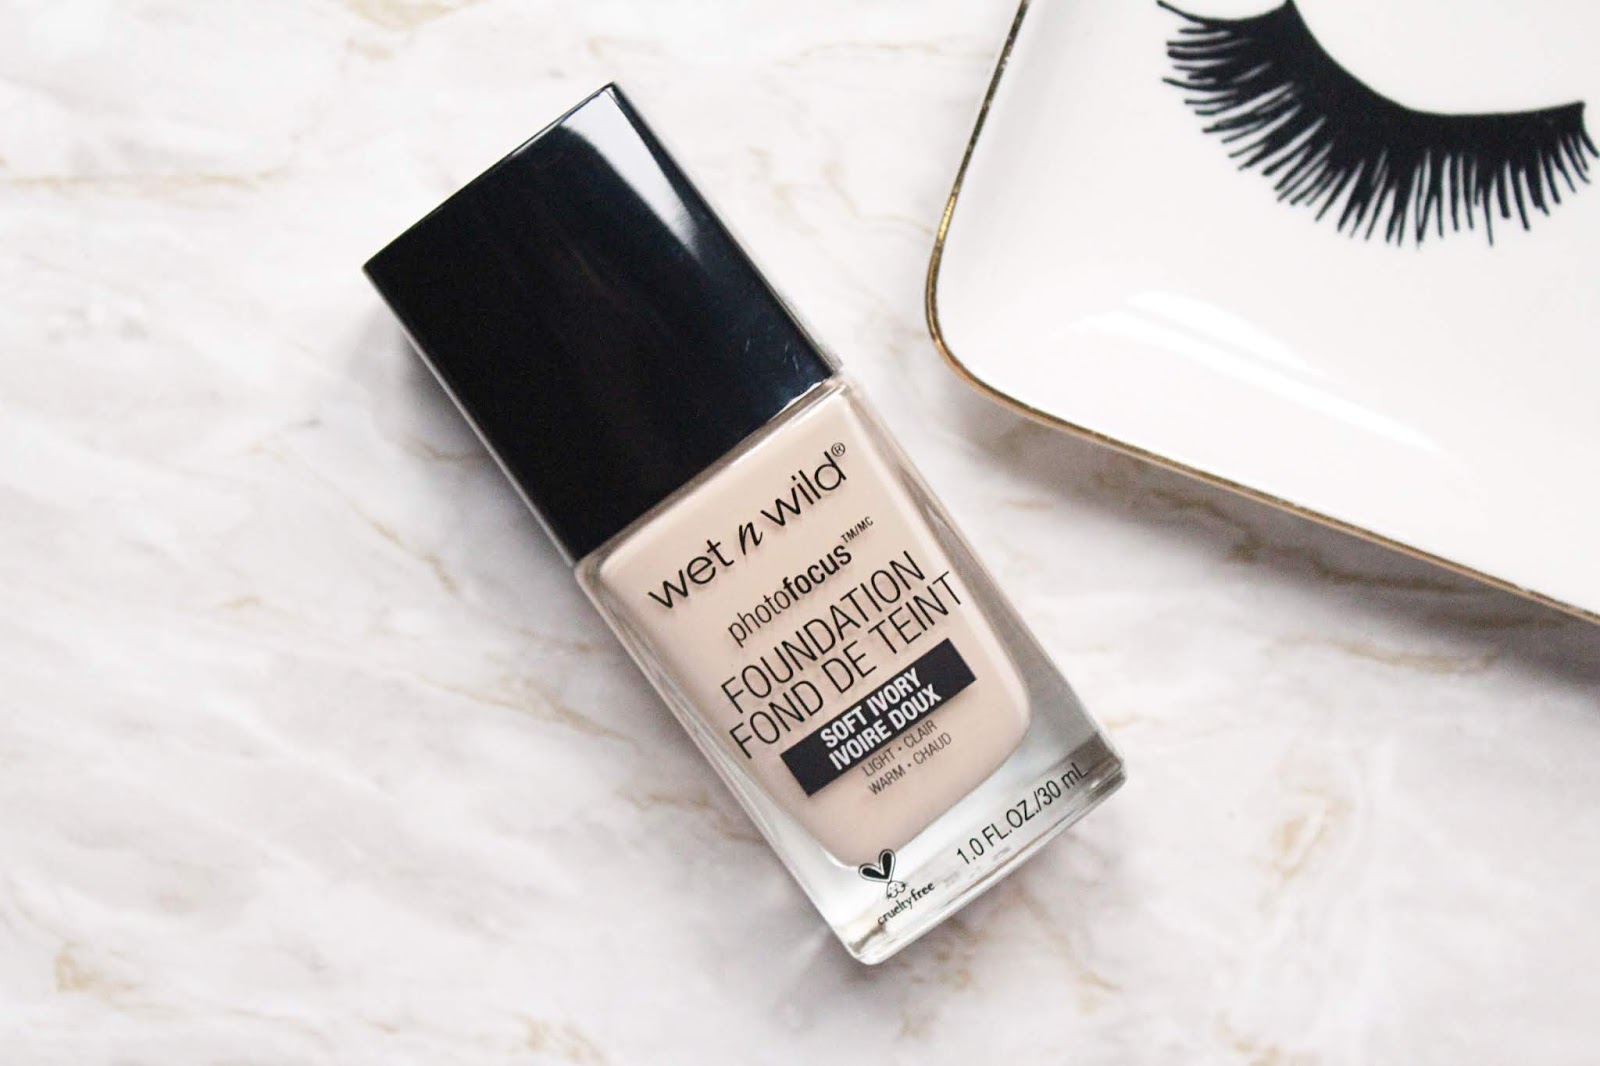 Wet n Wild Photo Focus Foundation Review